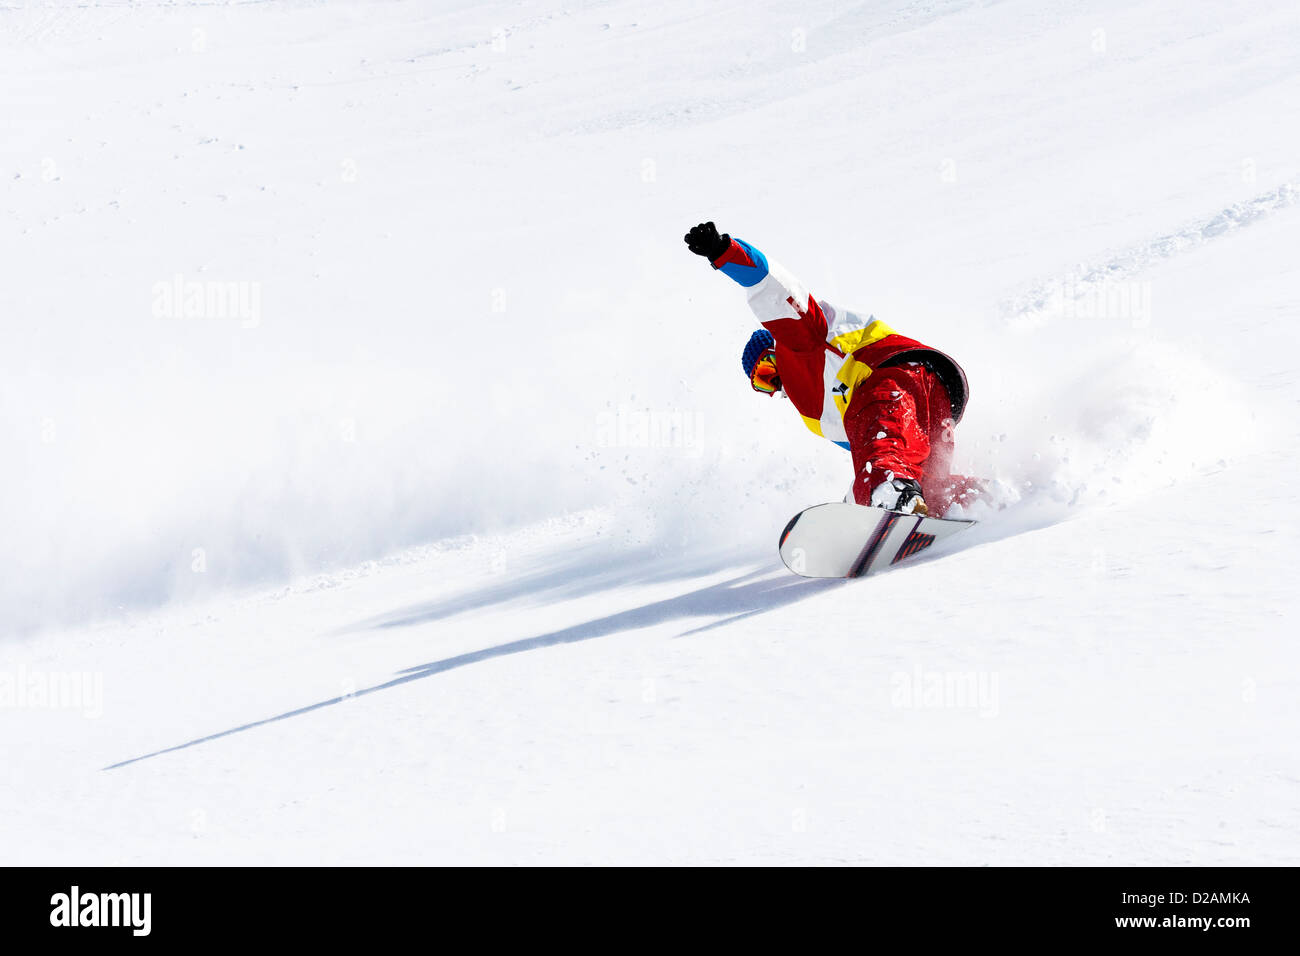 Snowboarder on snowy slope Stock Photo